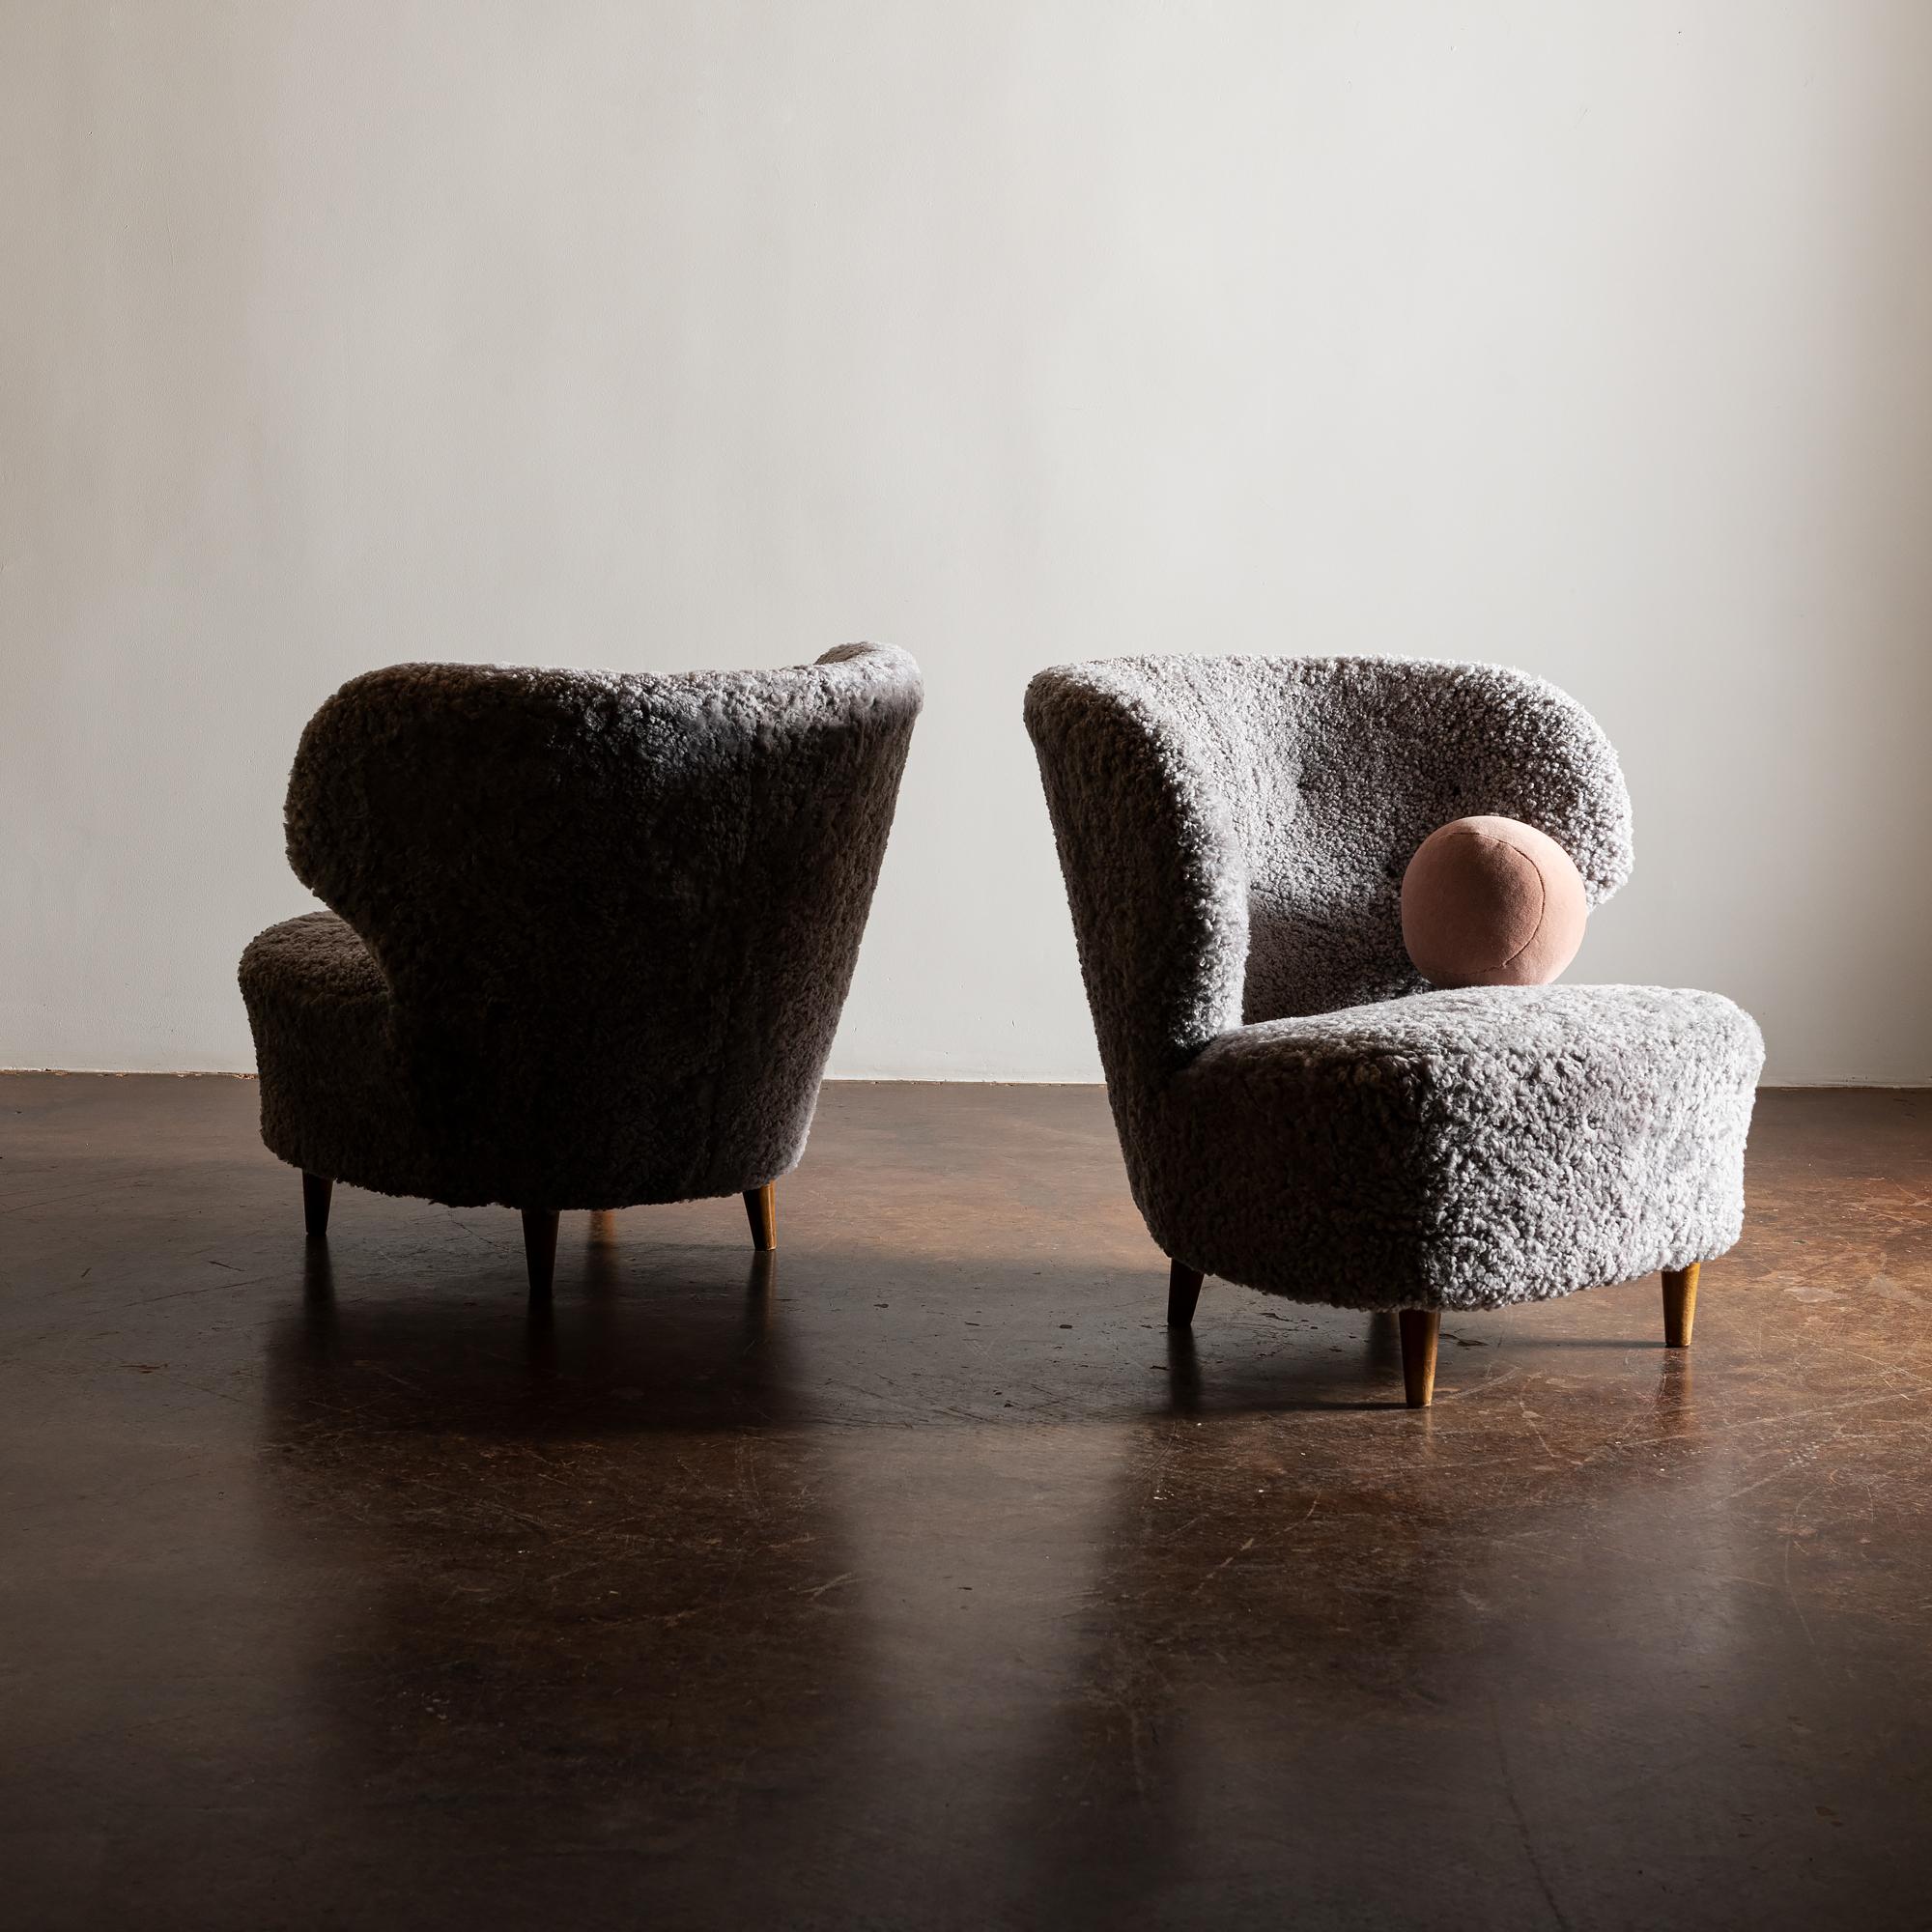 Rare pair of lounge chairs by Carl-Johan Boman, Finland, 1940s. These examples have a beautifully curved back and mounded seat, giving these chairs a graceful, substantial presence. This form contrasts nicely with the sheepskin texture and organic